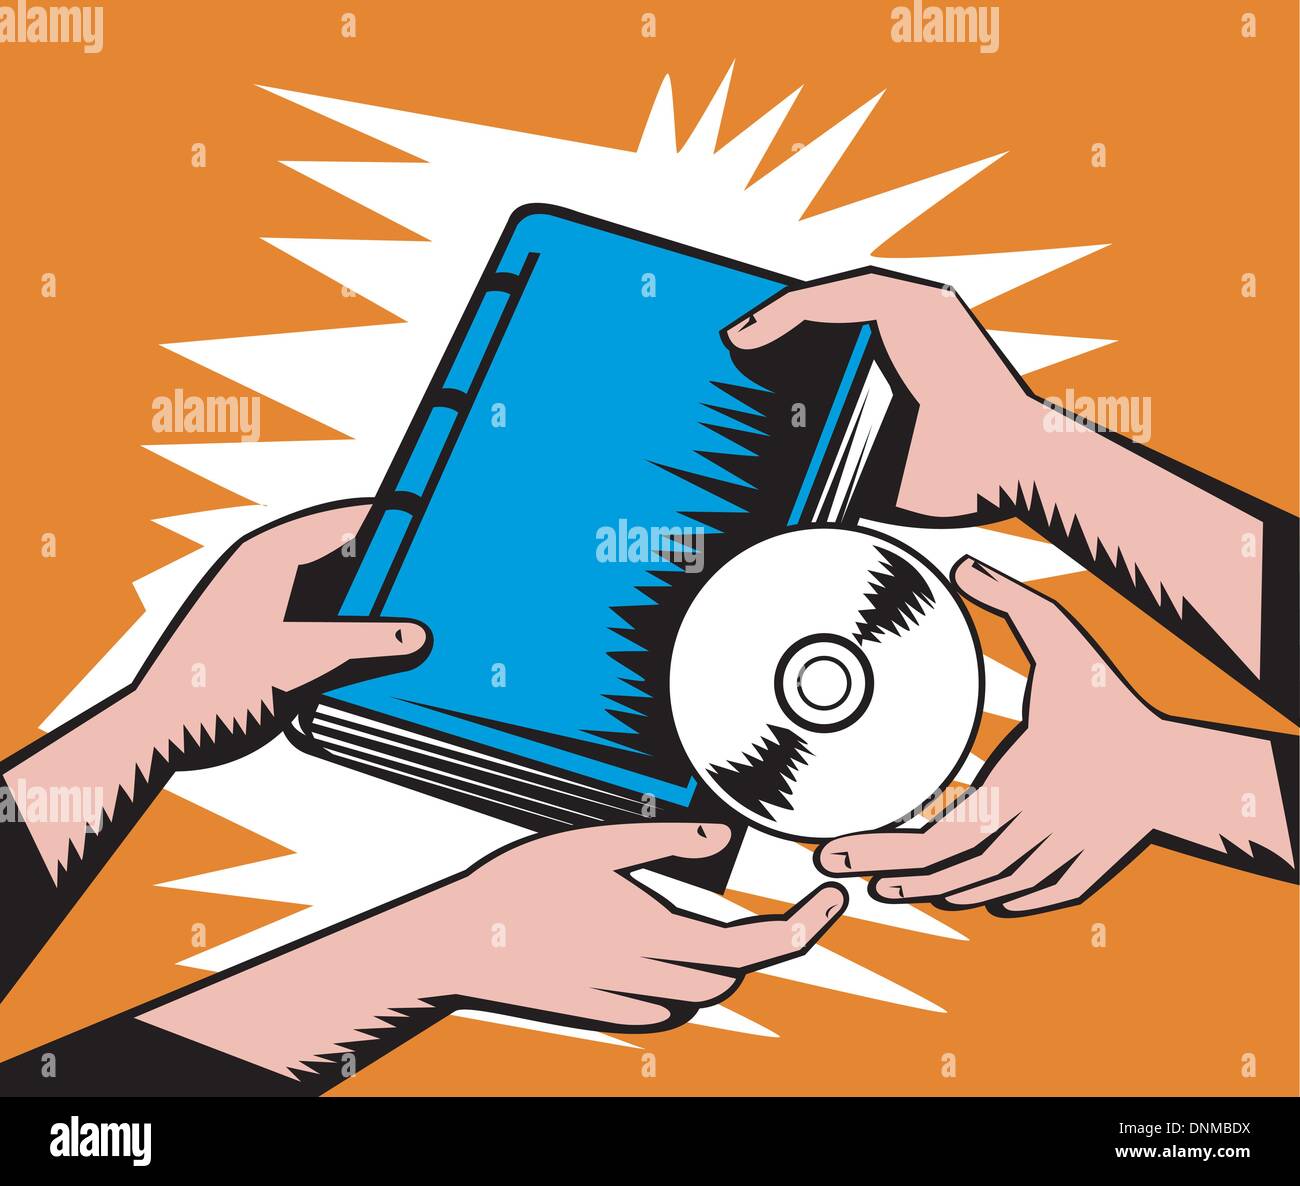 Illustration of two pair of hands exchanging book and cd disk done in retro woodcut style. Stock Vector